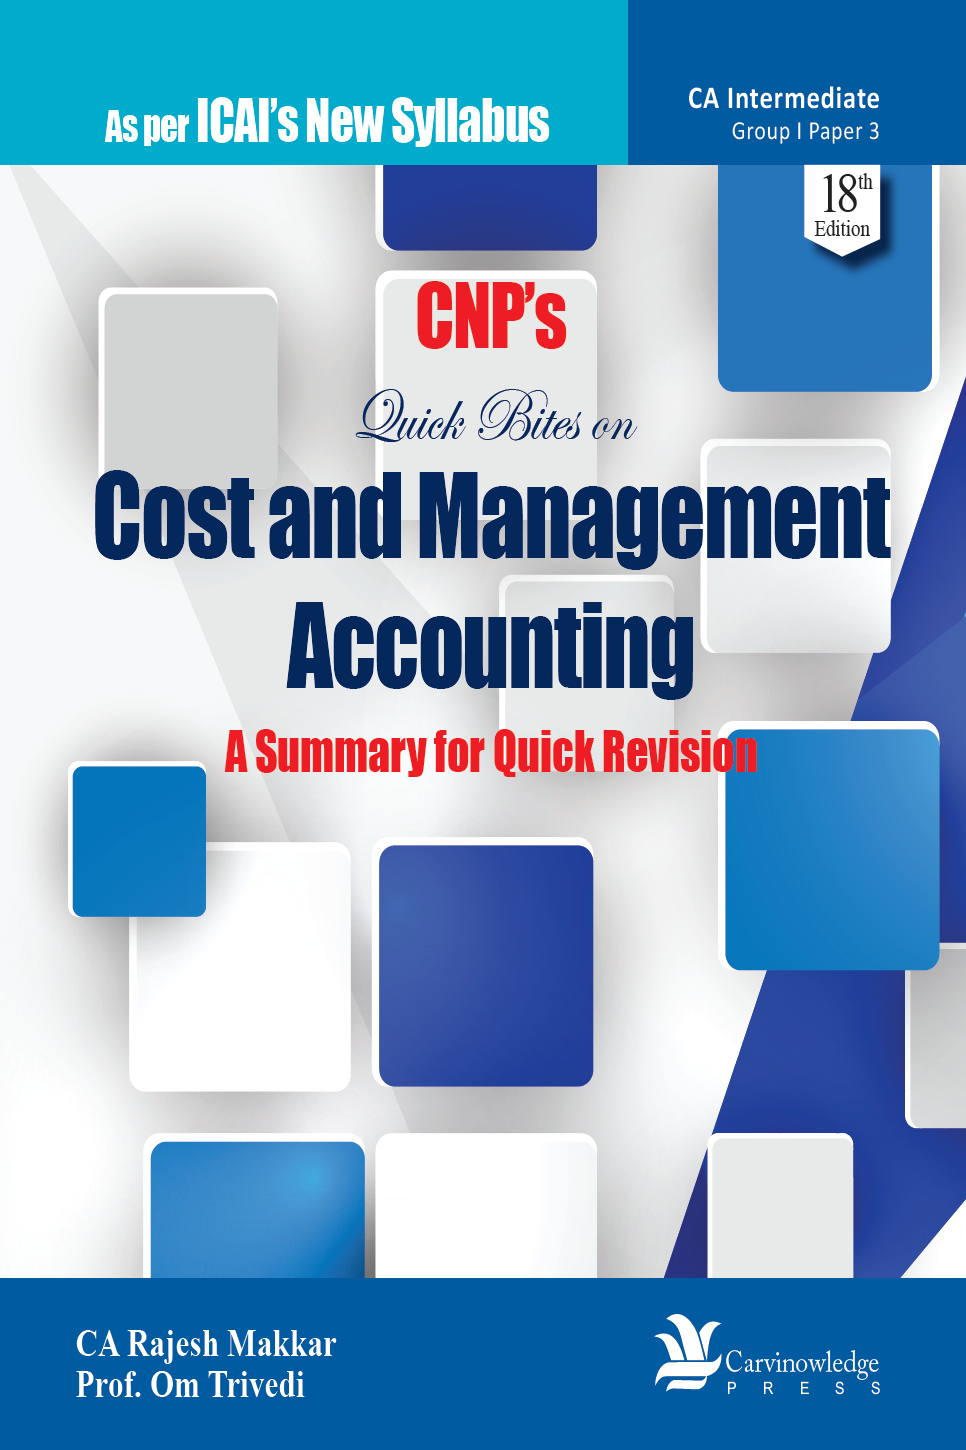  COST AND MANAGEMENT ACCOUNTING THEORY AND PRACTICE BY CA RAJESH MAKKAR